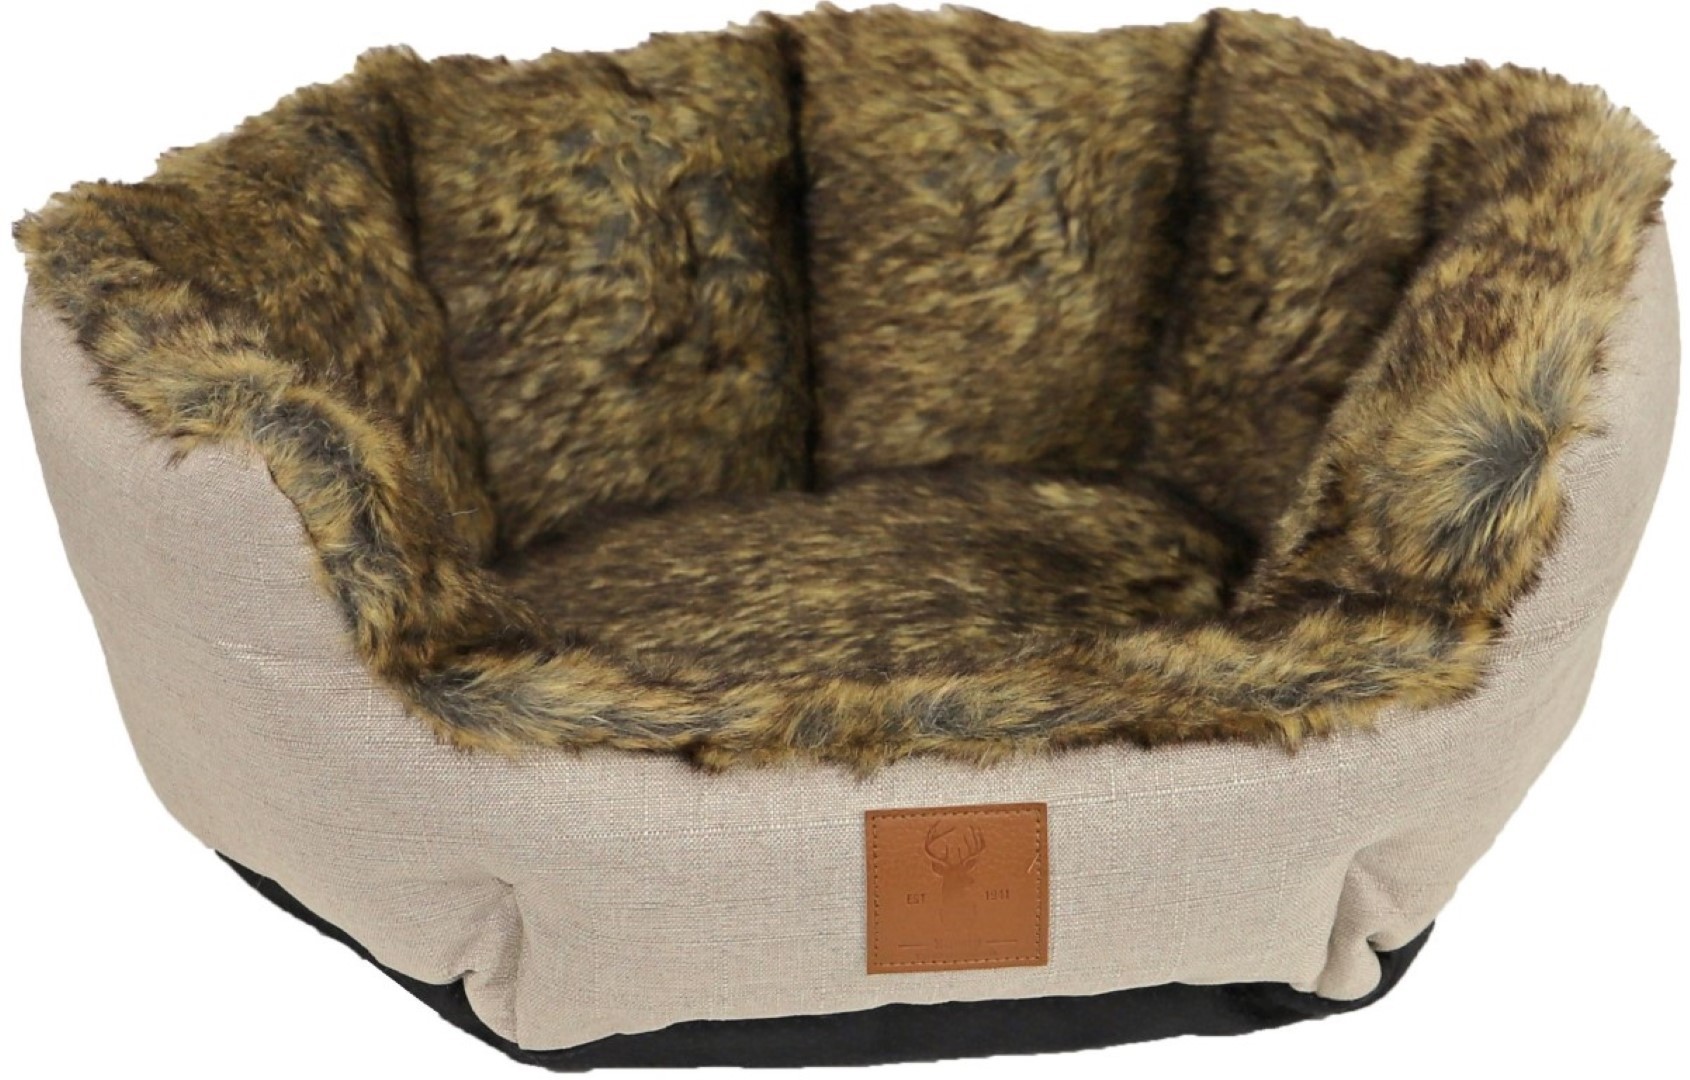 https://www.warentuin.nl/media/catalog/product/1/7/1778712901065089_boony_est_1941_dierenaccessoires_boony_est_1941_mand_grizzly_b_4ae0.jpg